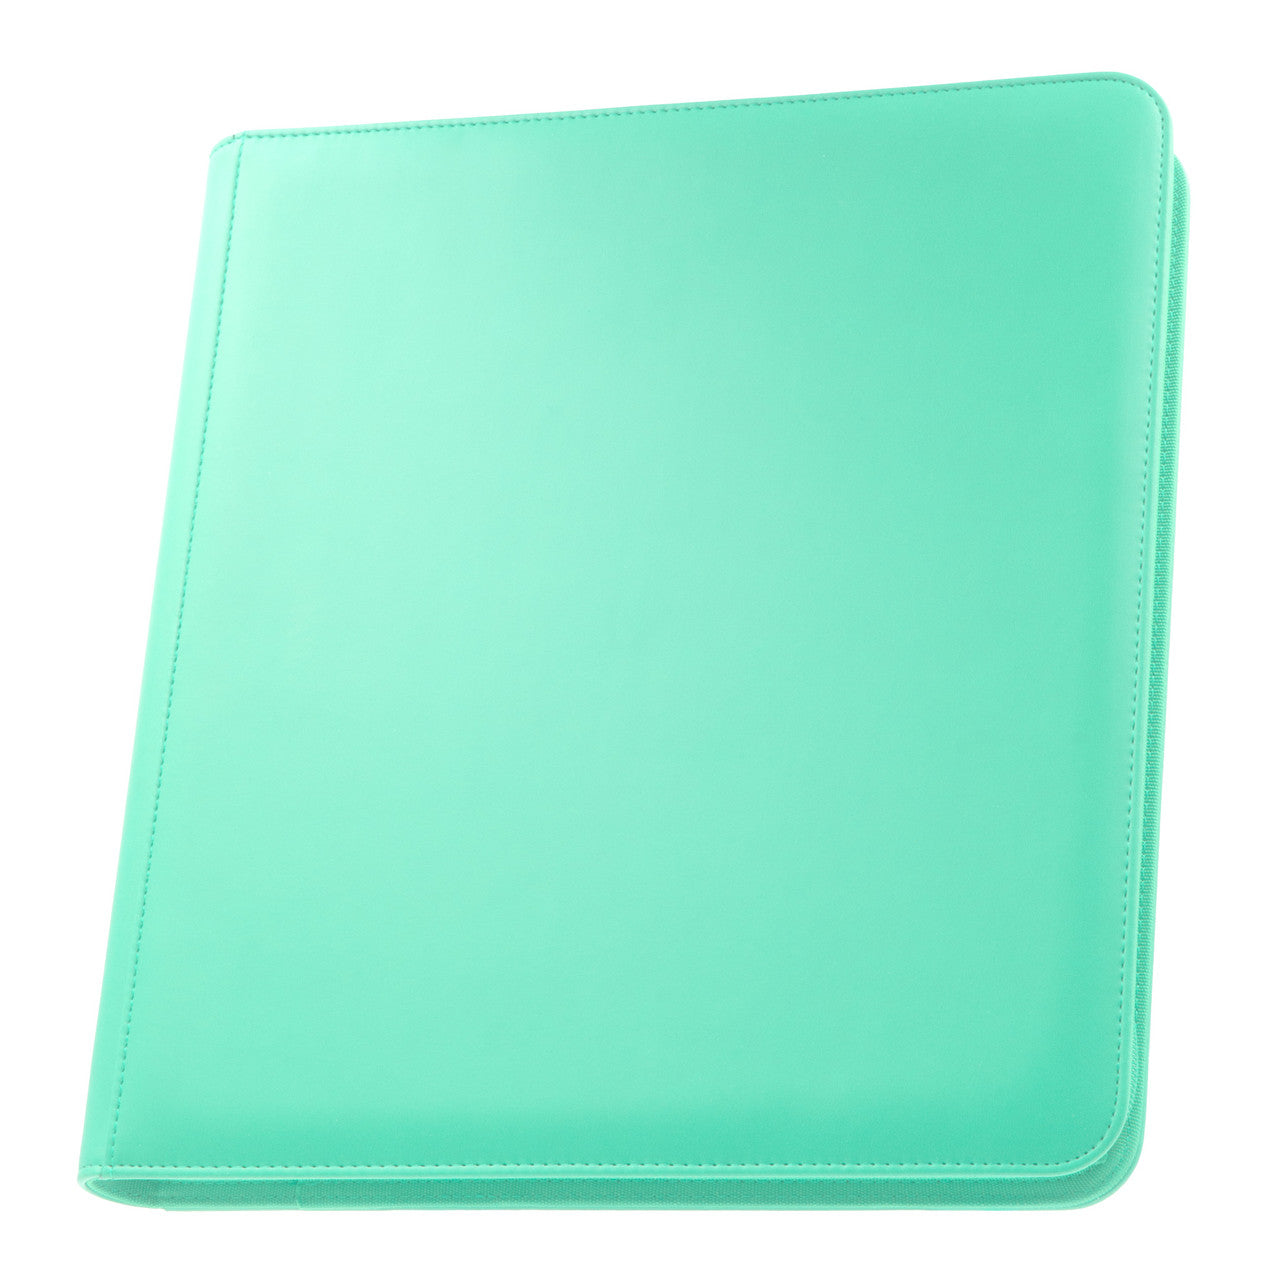 Palms Off Gaming STEALTH 12 Pocket Zip Trading Card Binder - Turquoise